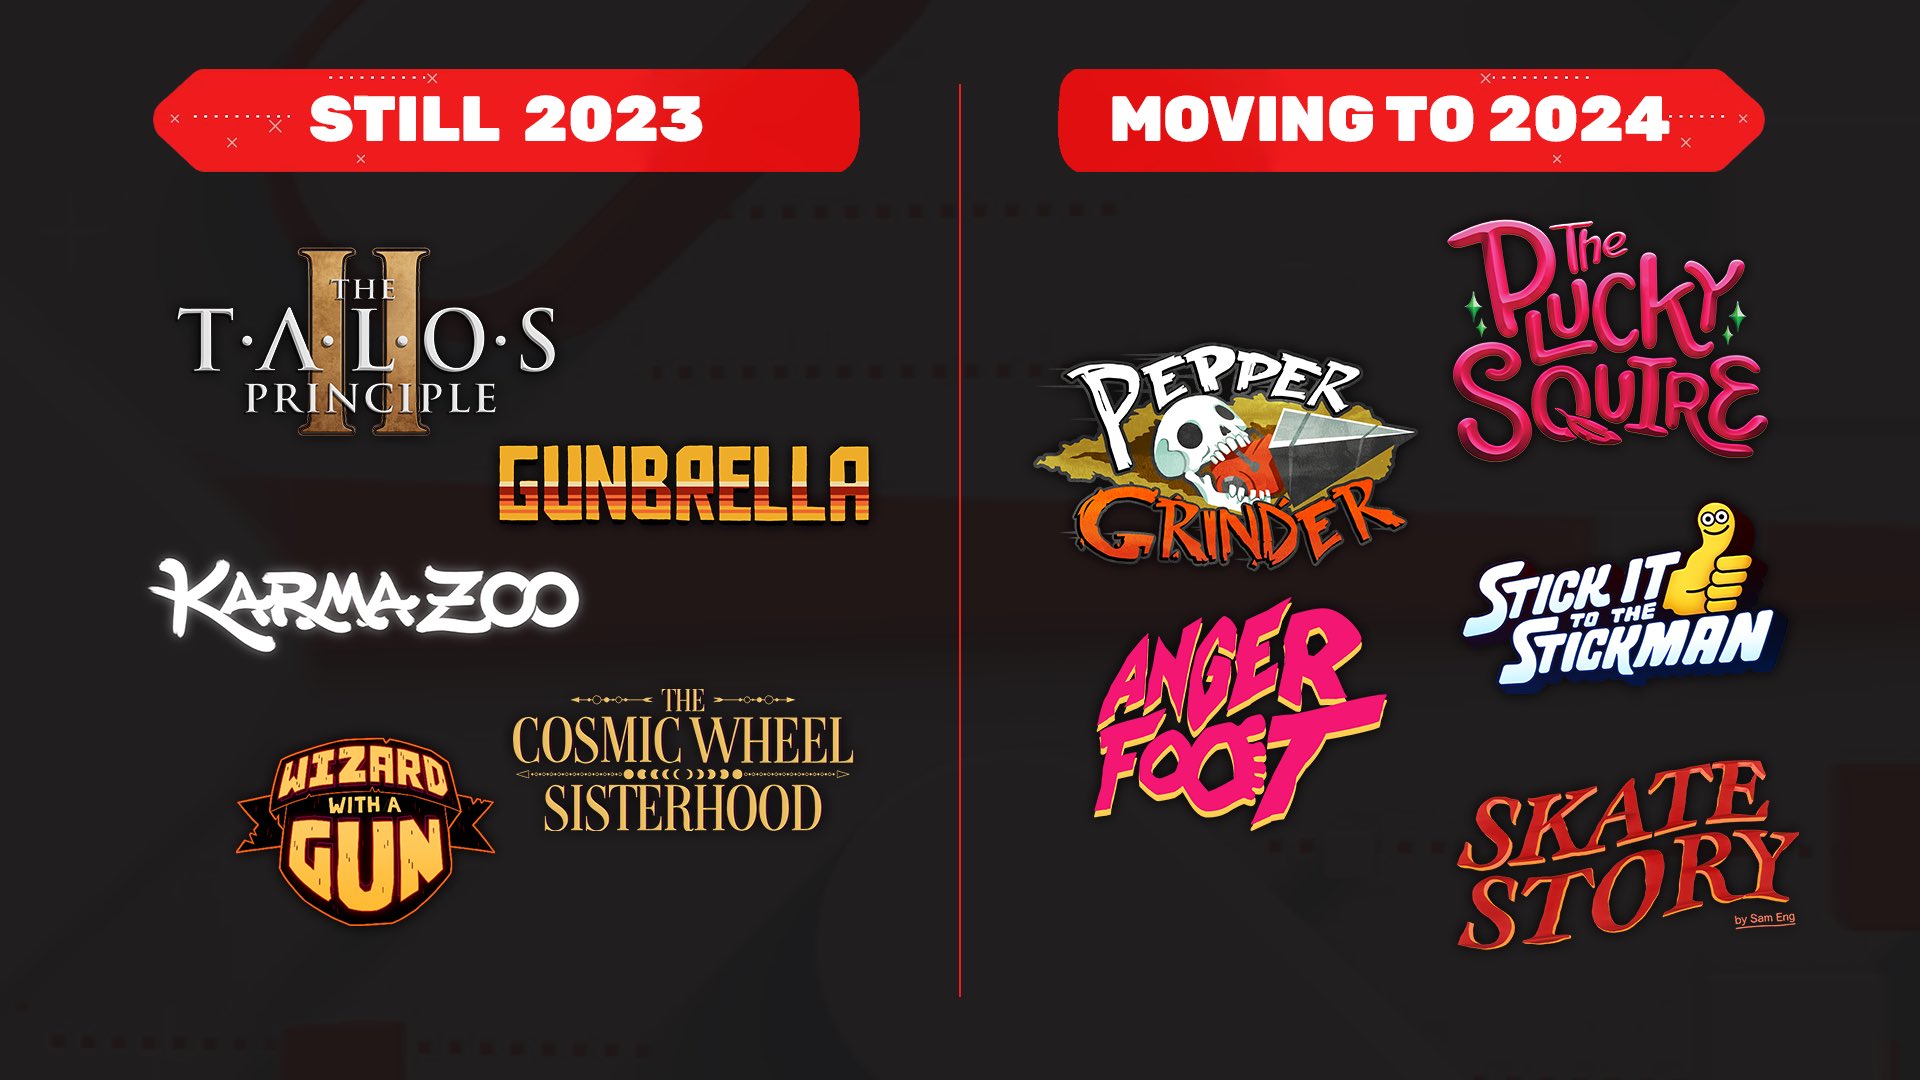 A graphic showing what Devolver Digital is delaying, and what's on schedule. Delayed games include The Plucky Squire, Stick It to the Stickman, Skate Story, Anger Foot, and Pepper Grinder. On time games include Gunbrella, Wizard with a Gun, The Talos Principle 2, The Cosmic Wheel Sisterhood, KarmaZoo, Broforce DLC, and McPixel 3 DLC.